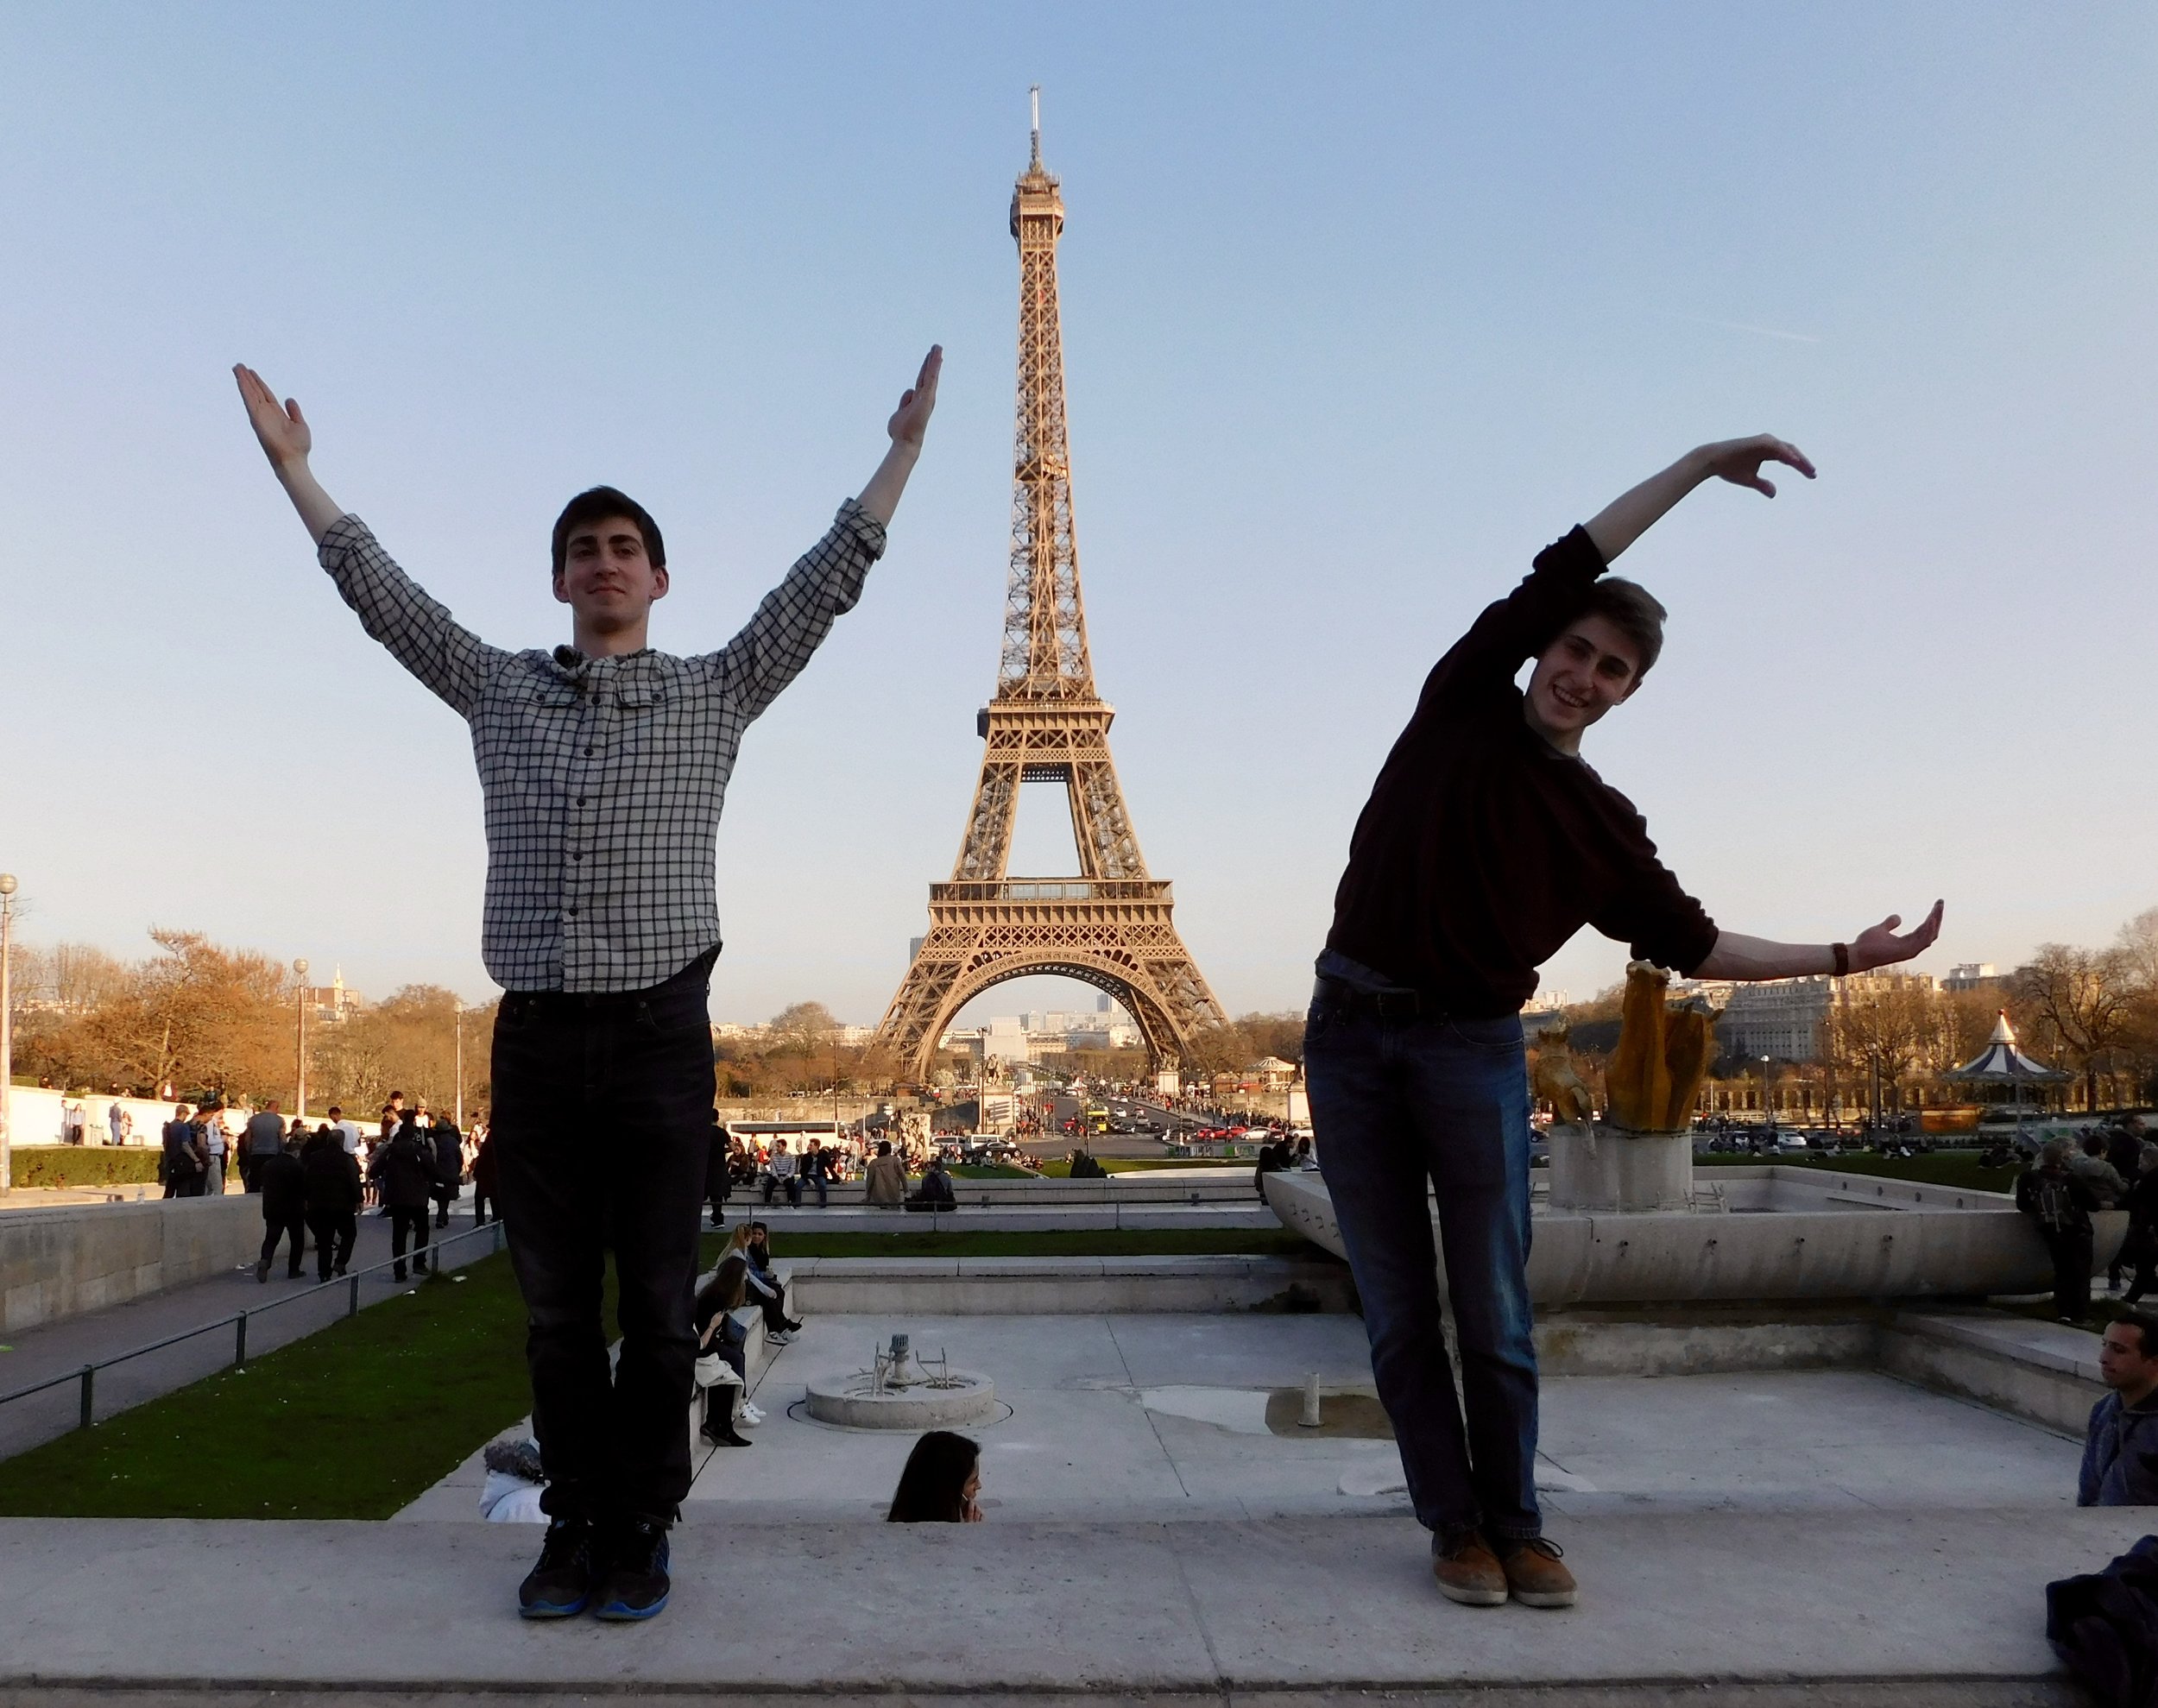  Jacob and Hale framing a "YAC" photo in front of the Eiffel Tower 